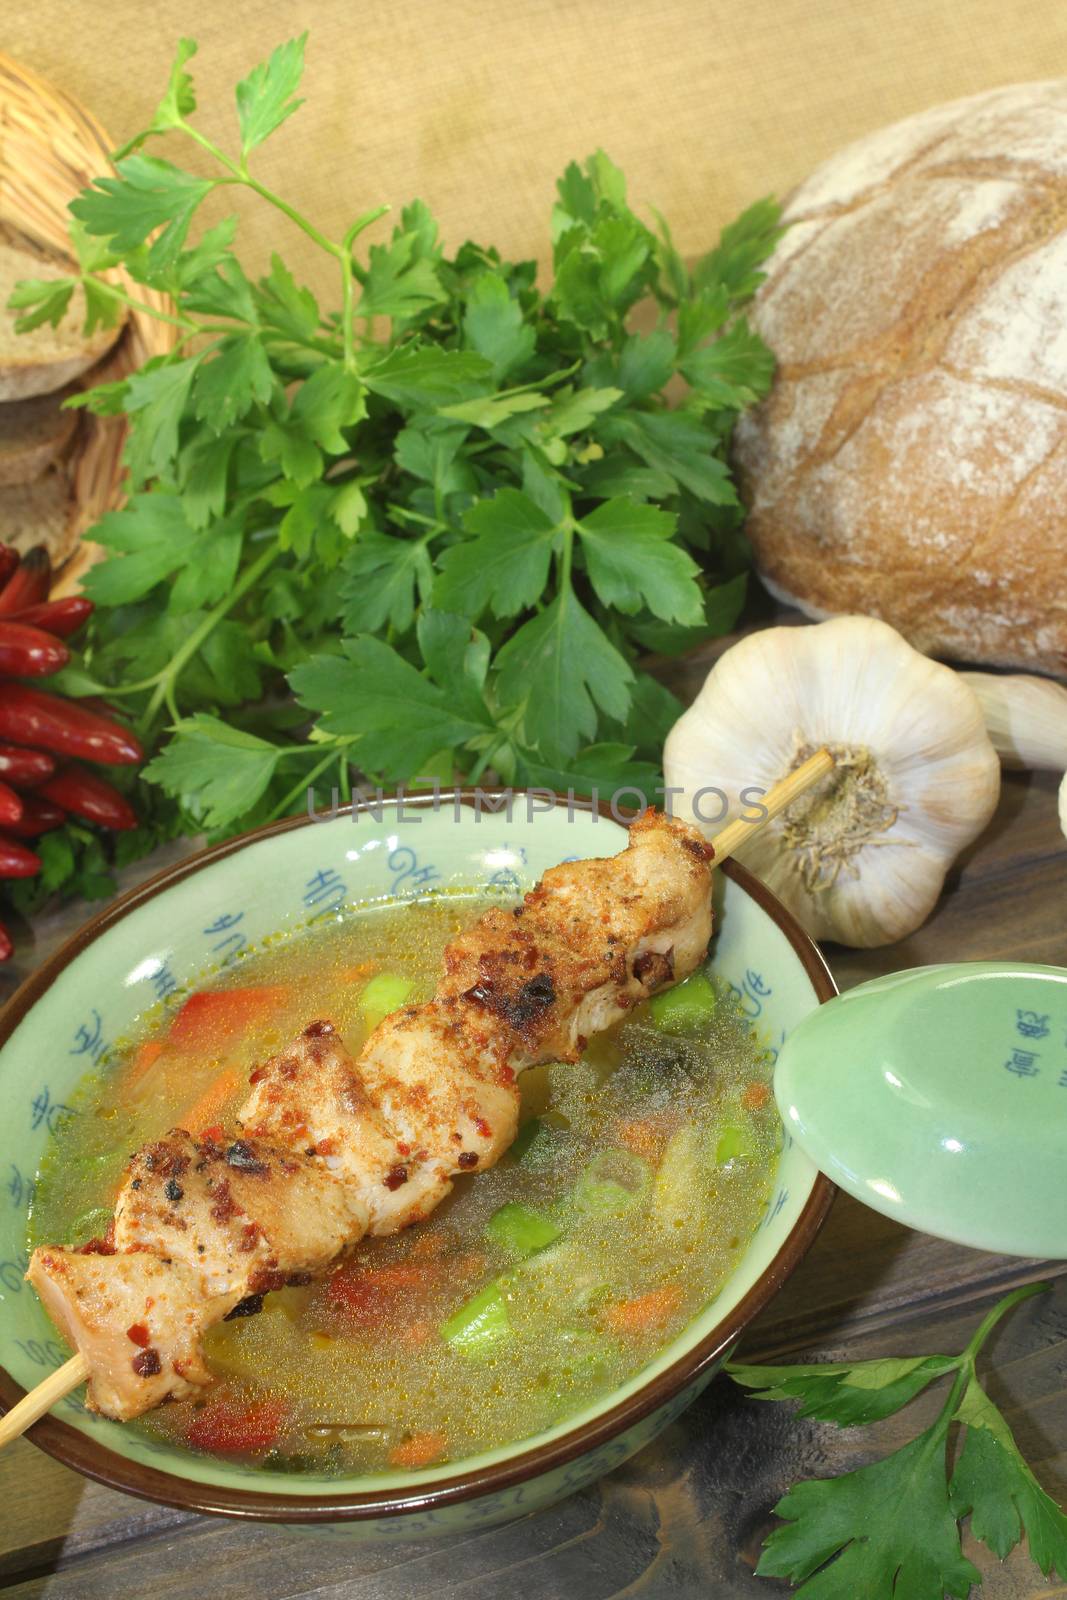 Poultry consomme with chicken skewer by discovery